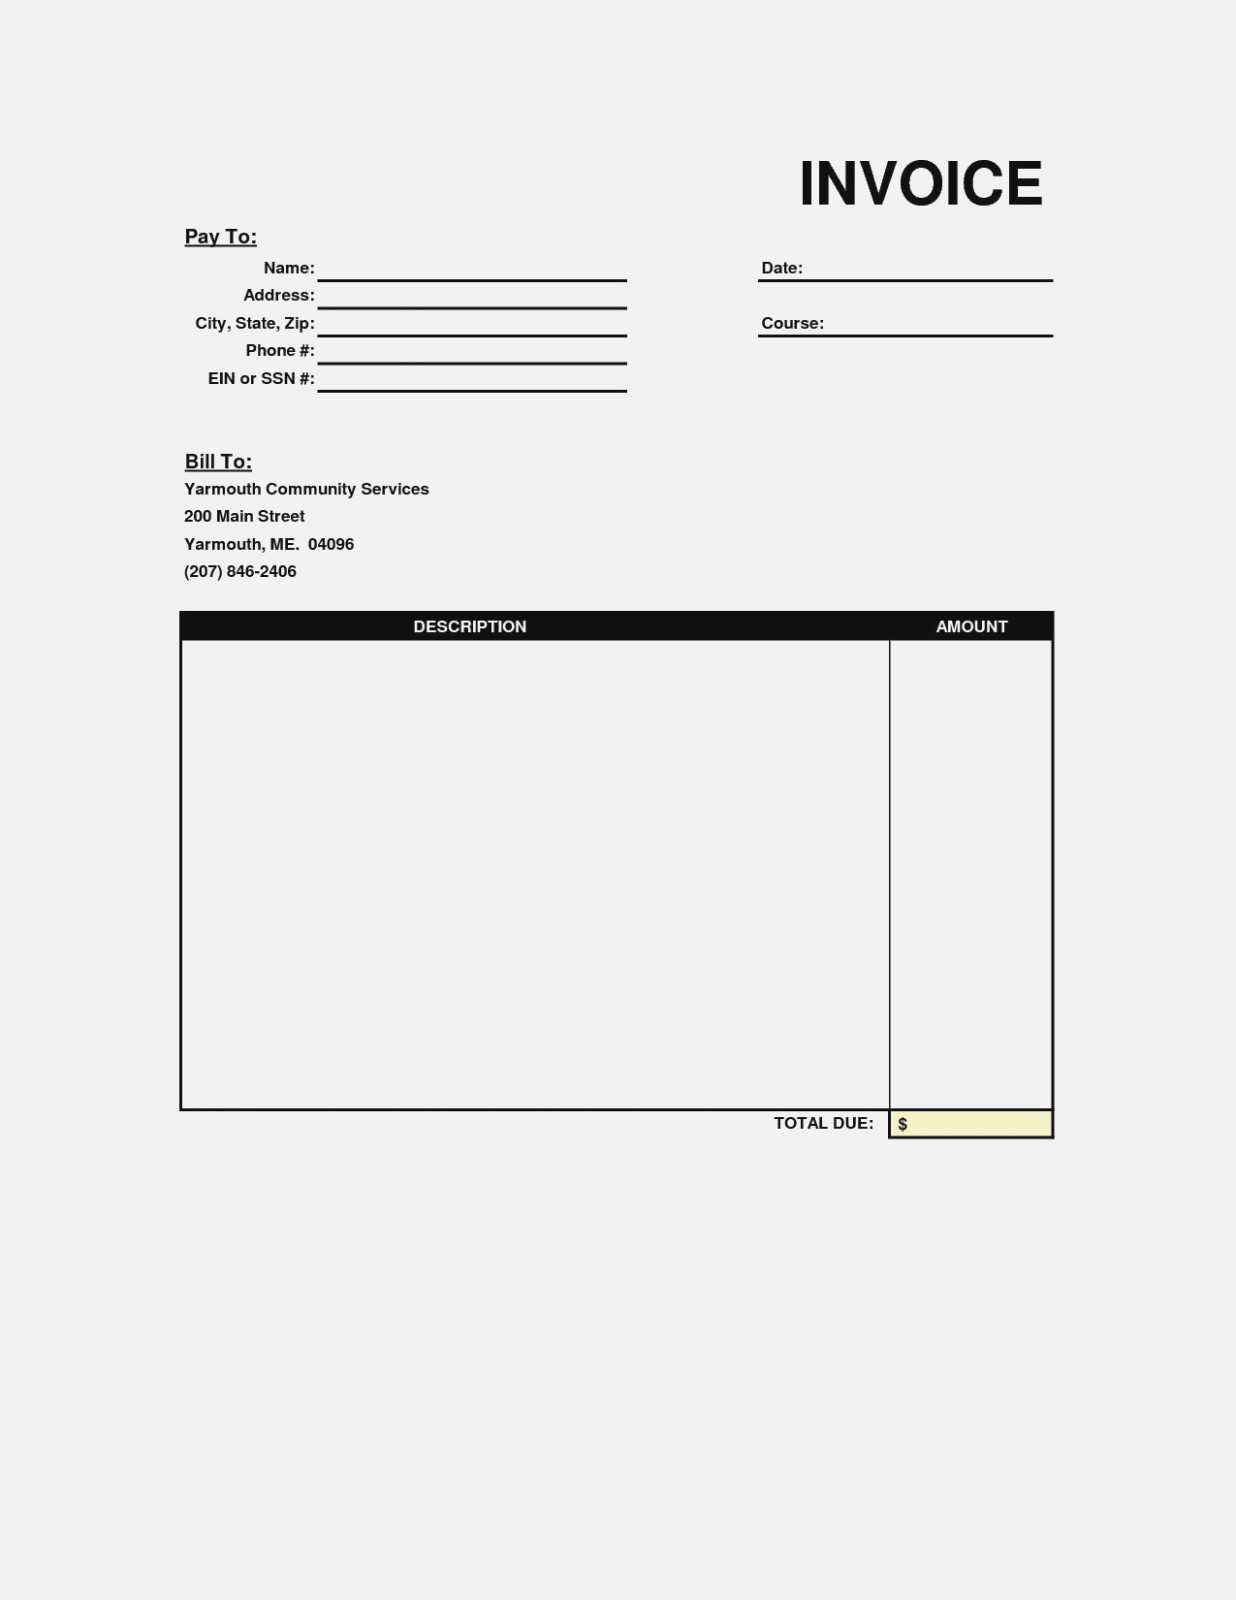 89 Adding Blank Sage Invoice Template Formating for Blank Sage Invoice Template